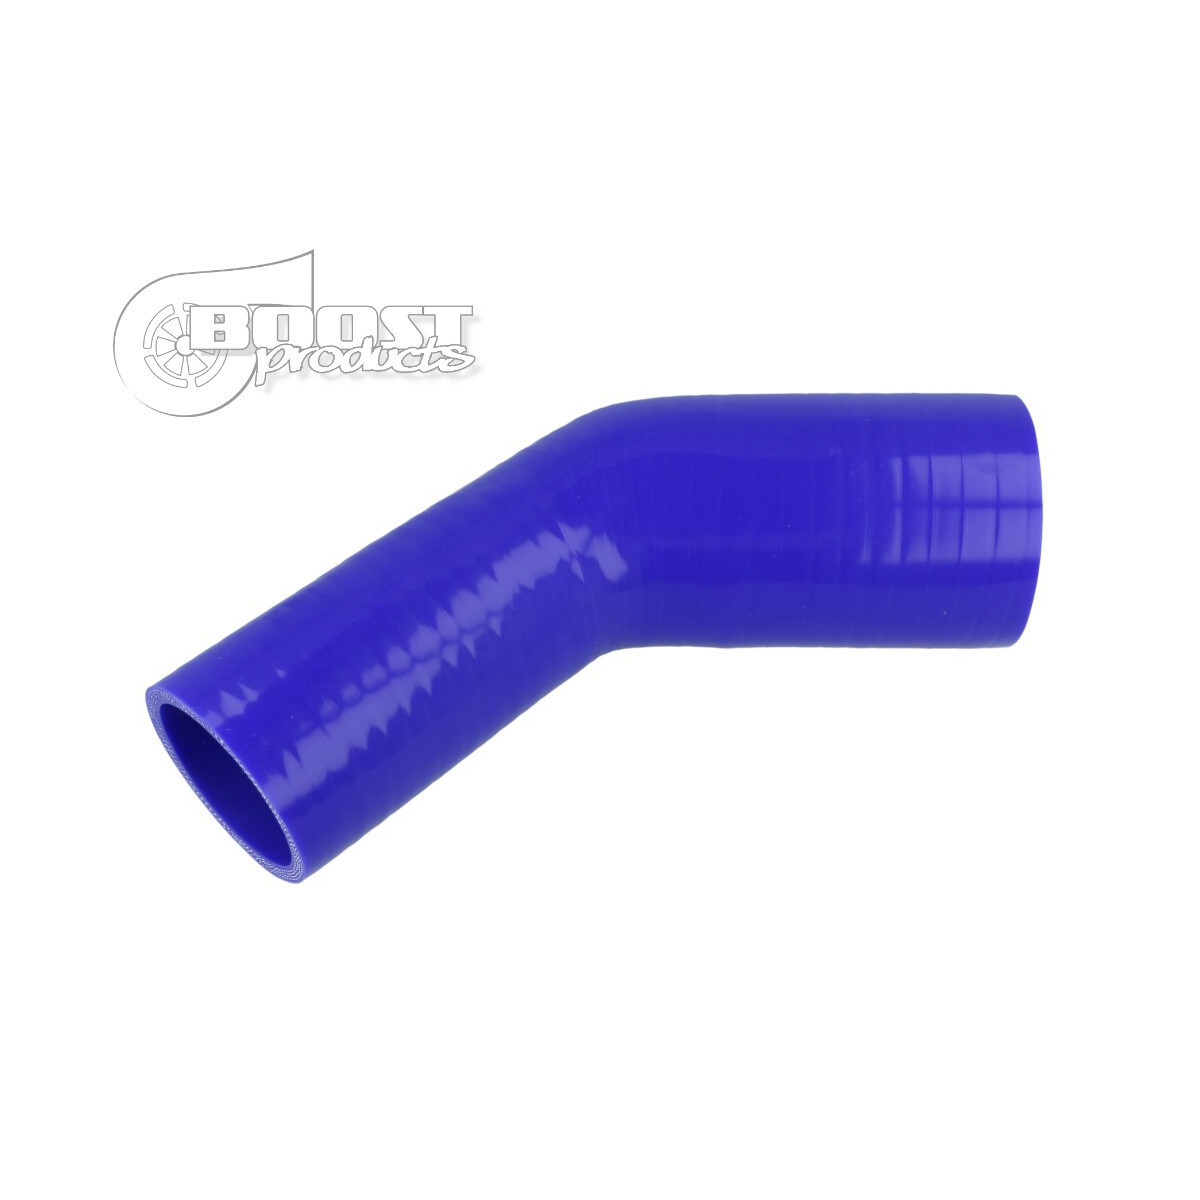 BOOST products Silicone Transition elbow 45°, 51 - 45mm, blue